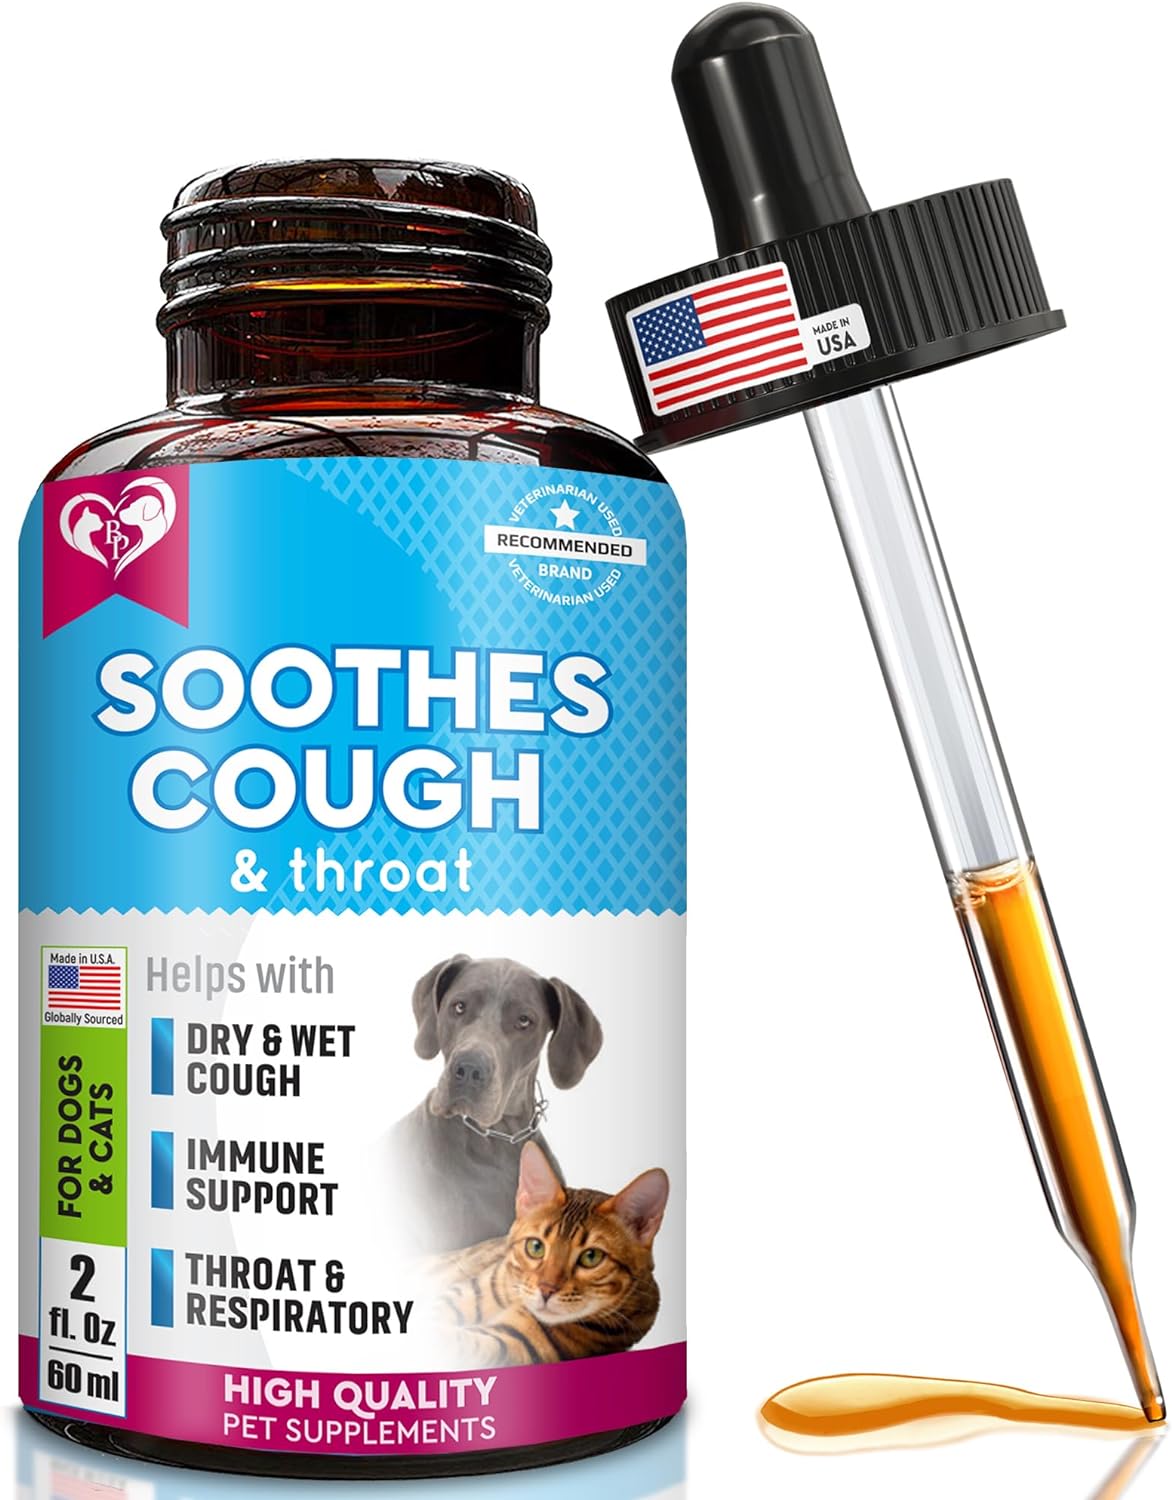 Kennel Cough Treatment & Natural Infection Medicine for Dogs & Cats - Respiratory & Cold Cough Relief - Collapse Trachea & Cat Asthma Support - Made in USA